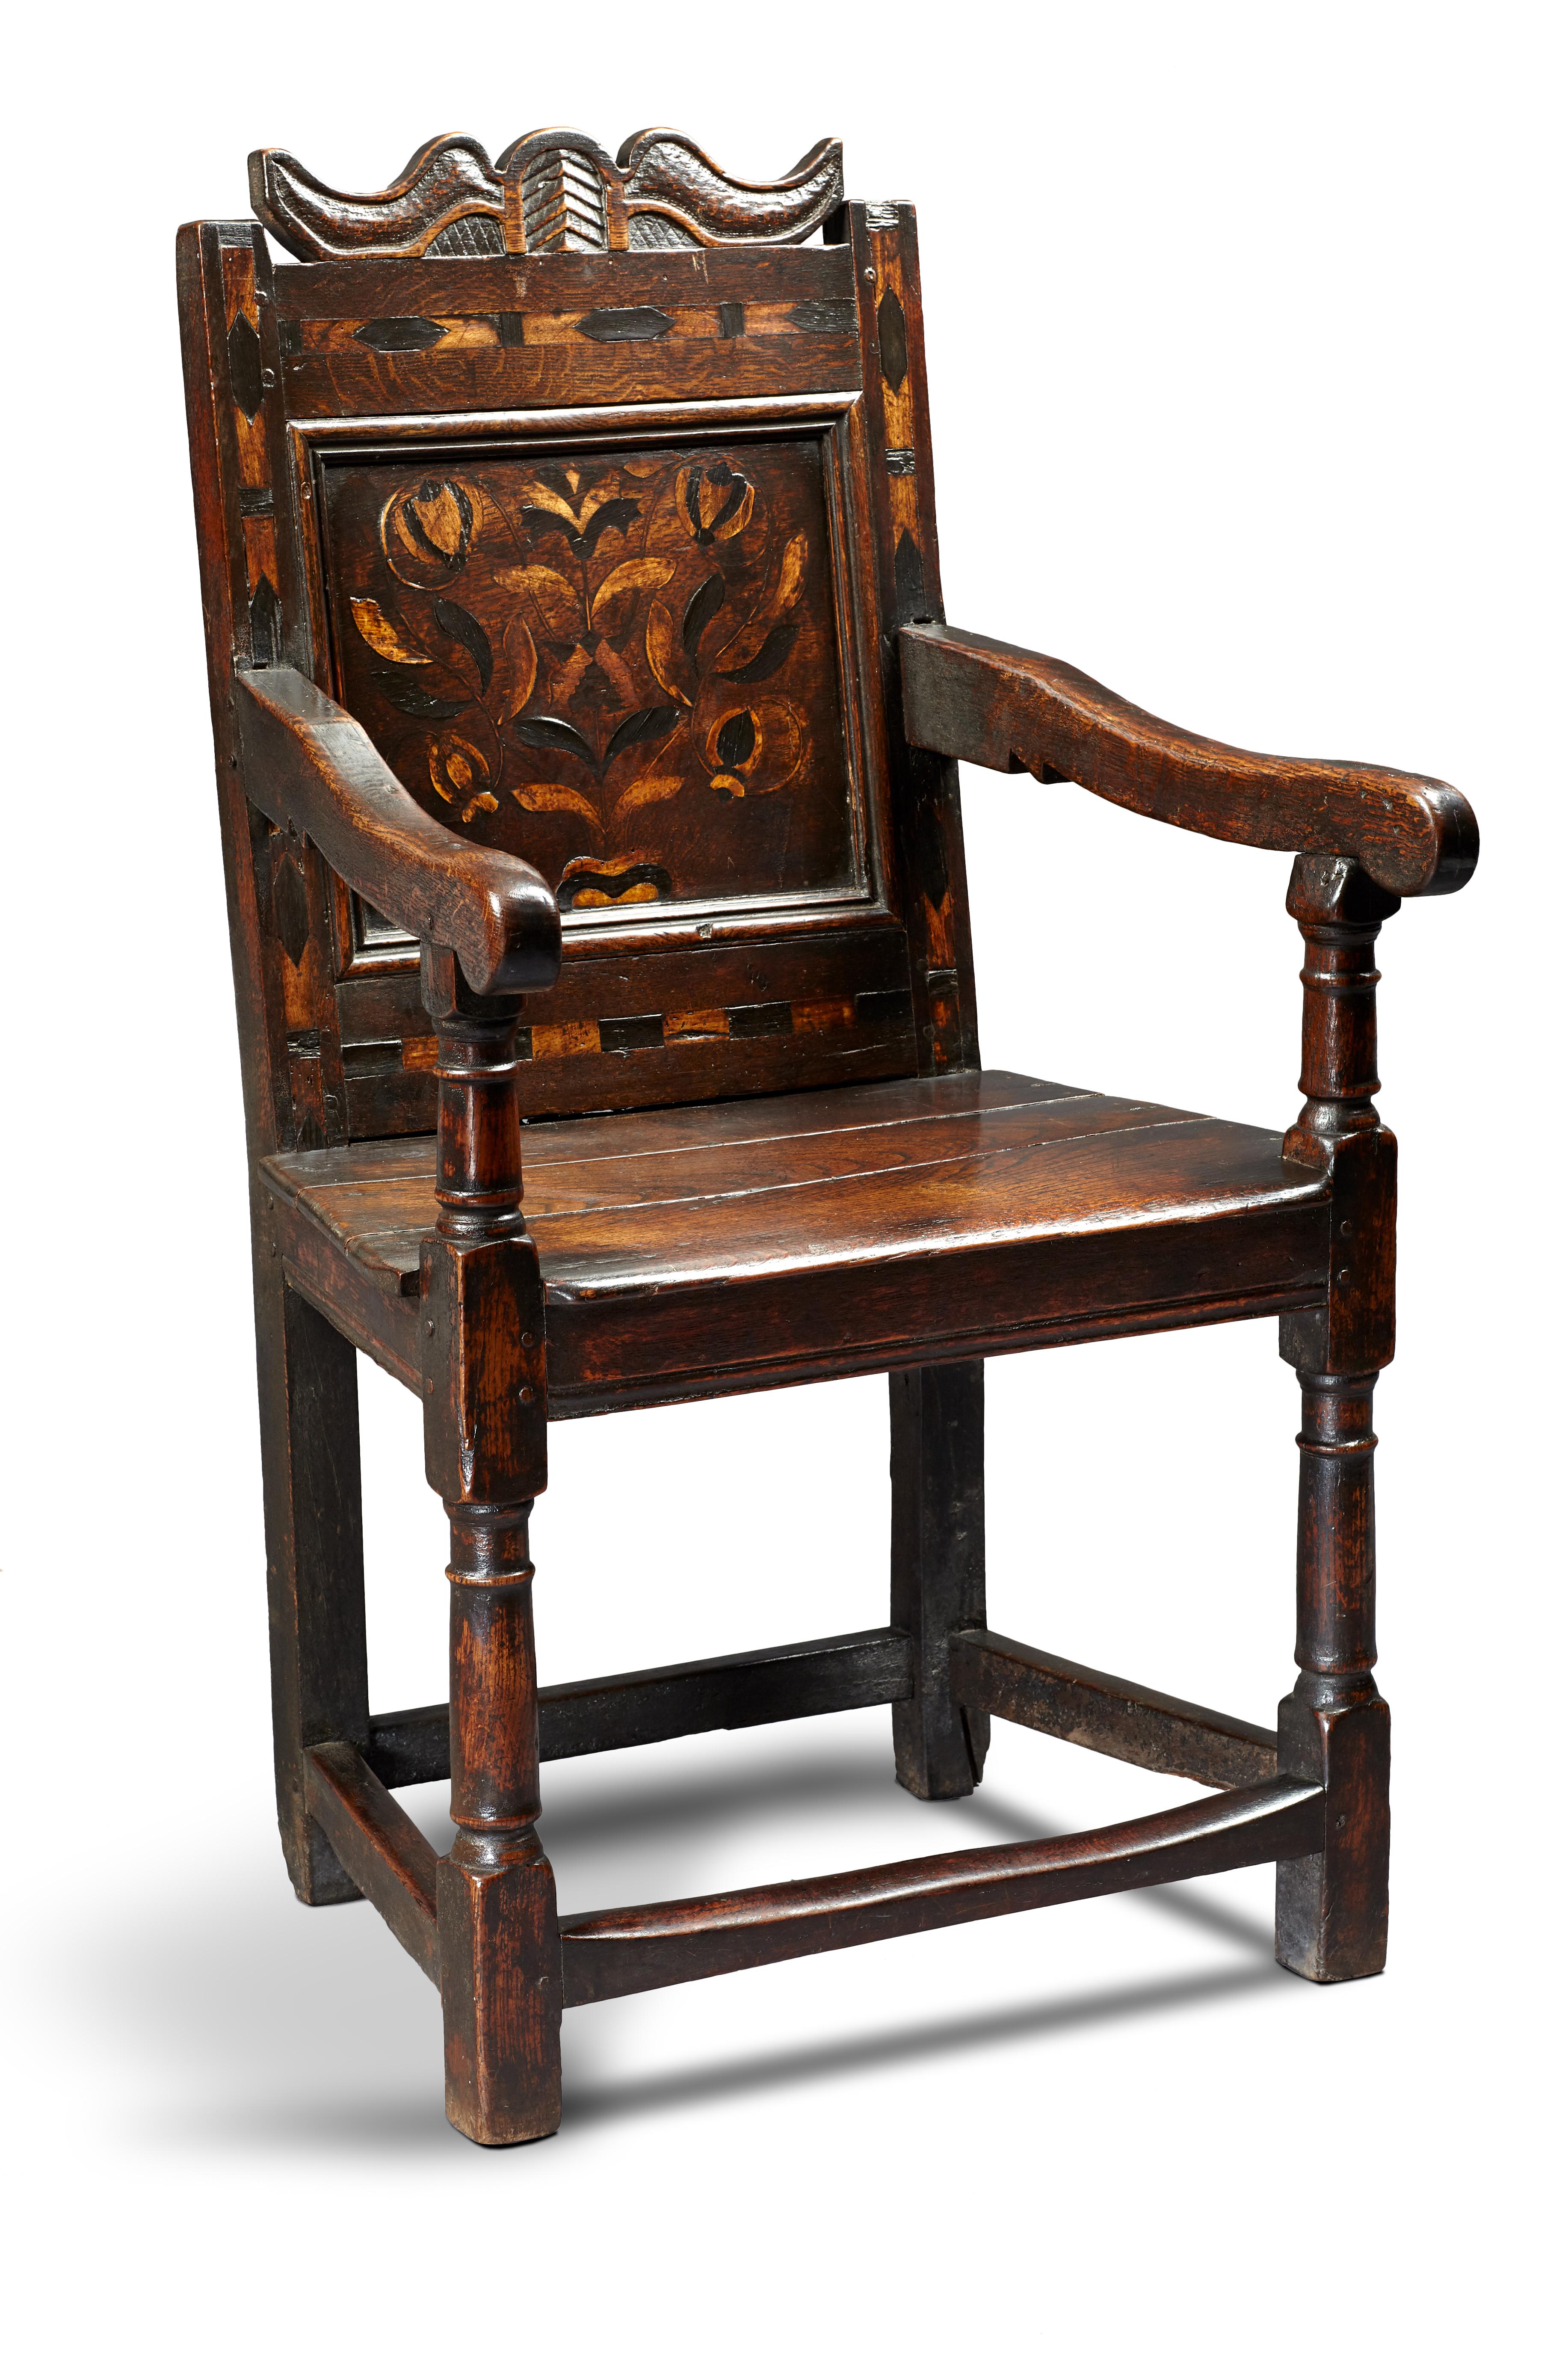 Mid-17th century oak and inlaid armchair, English, Gloucestershire, circa 1640-1650.

The unusual scroll shaped and diaper carved cresting centered upon a palmette above bold chevron inlaid rails with floral inlaid back panel, joined by sloped